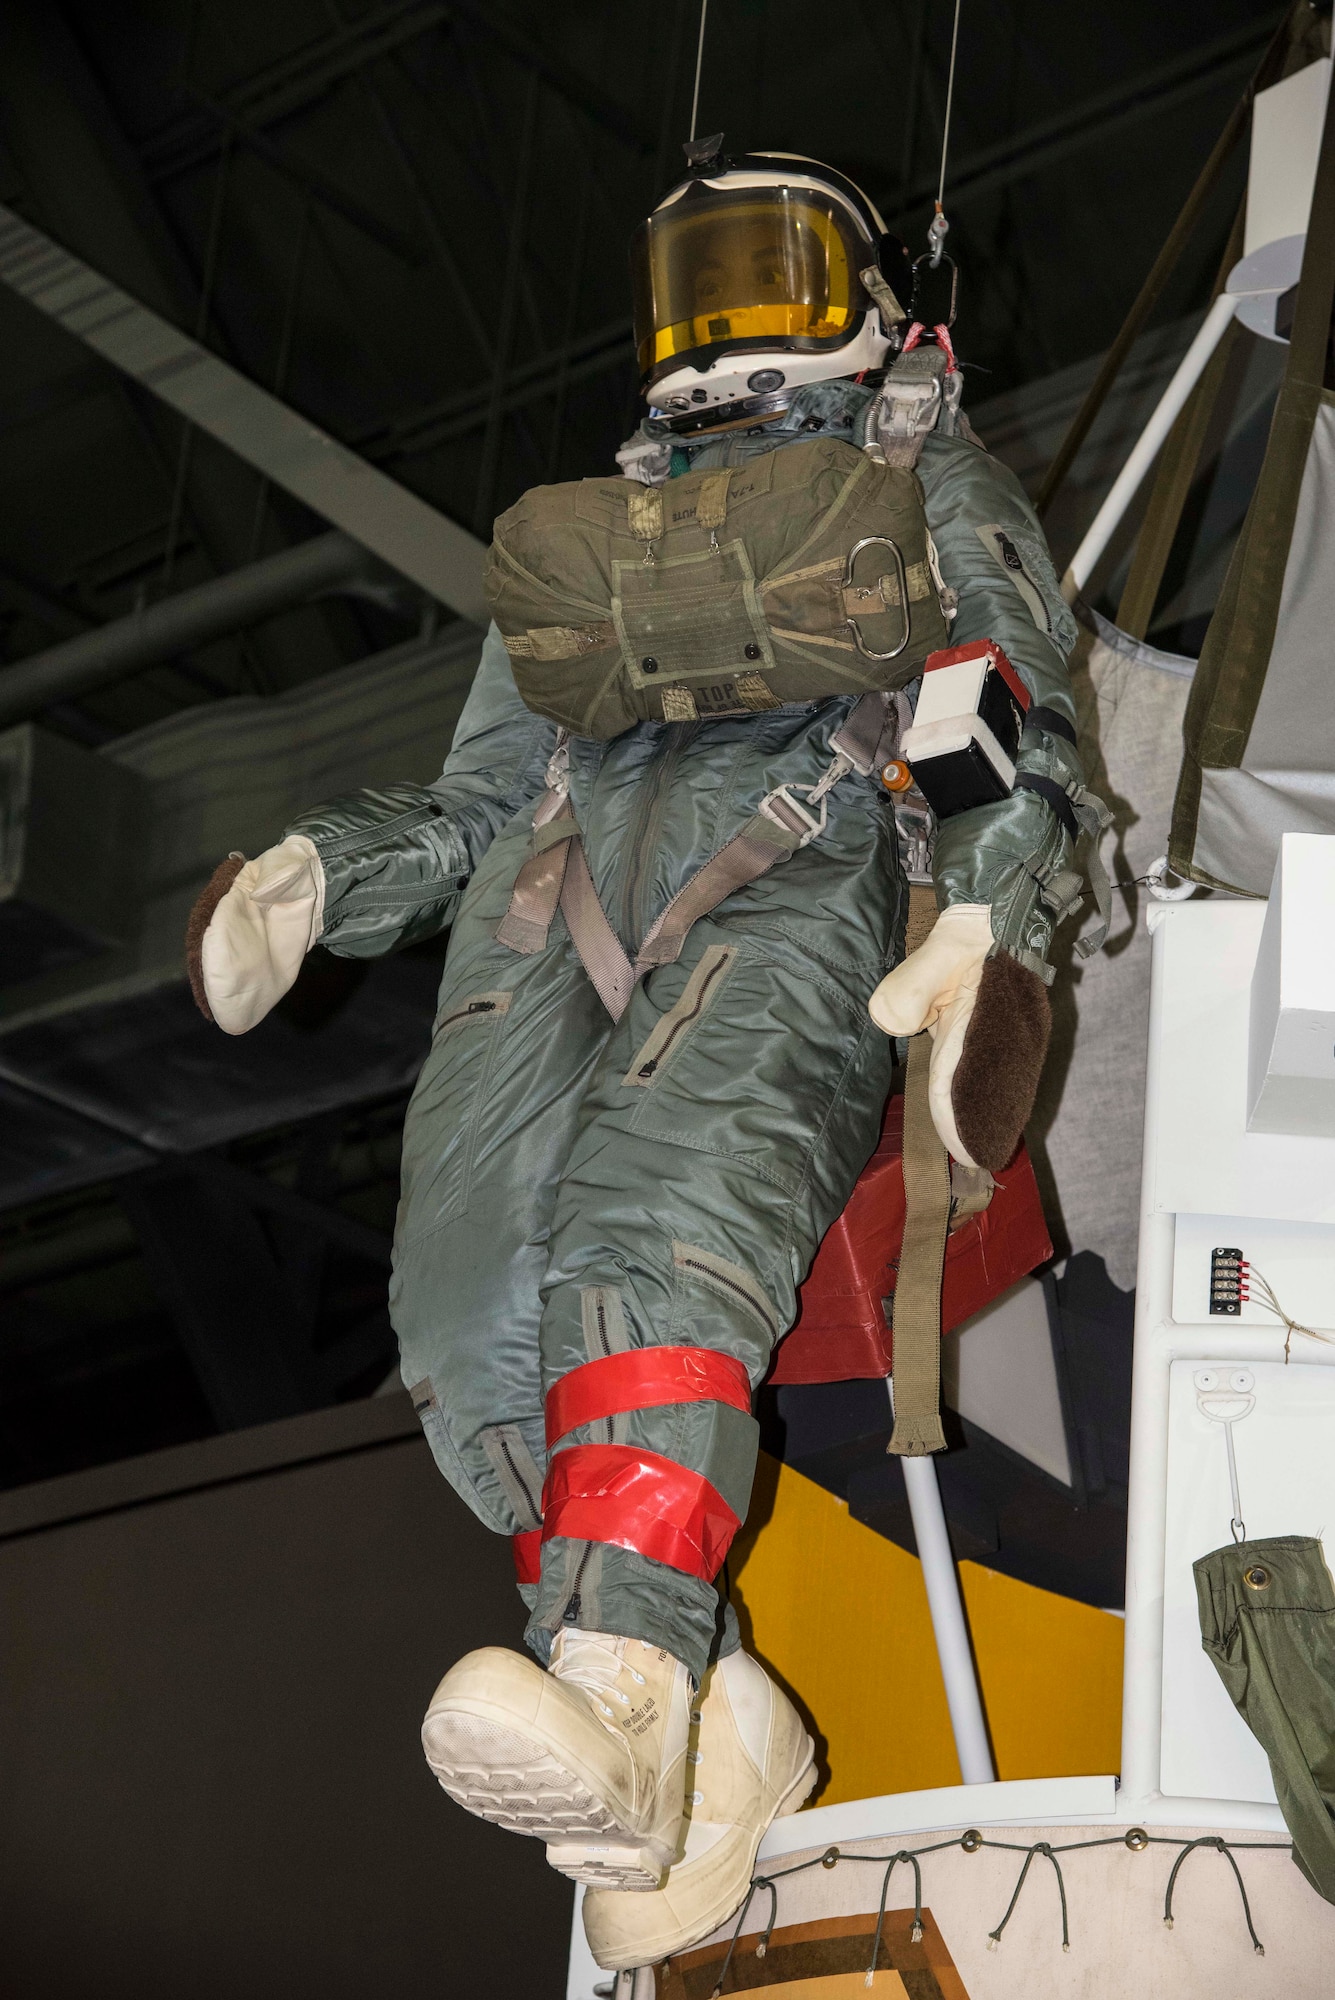 DAYTON, Ohio -- Excelsior Gondola on display in the Space Gallery at the National Museum of the United States Air Force. (U.S. Air Force photo by Ken LaRock) 